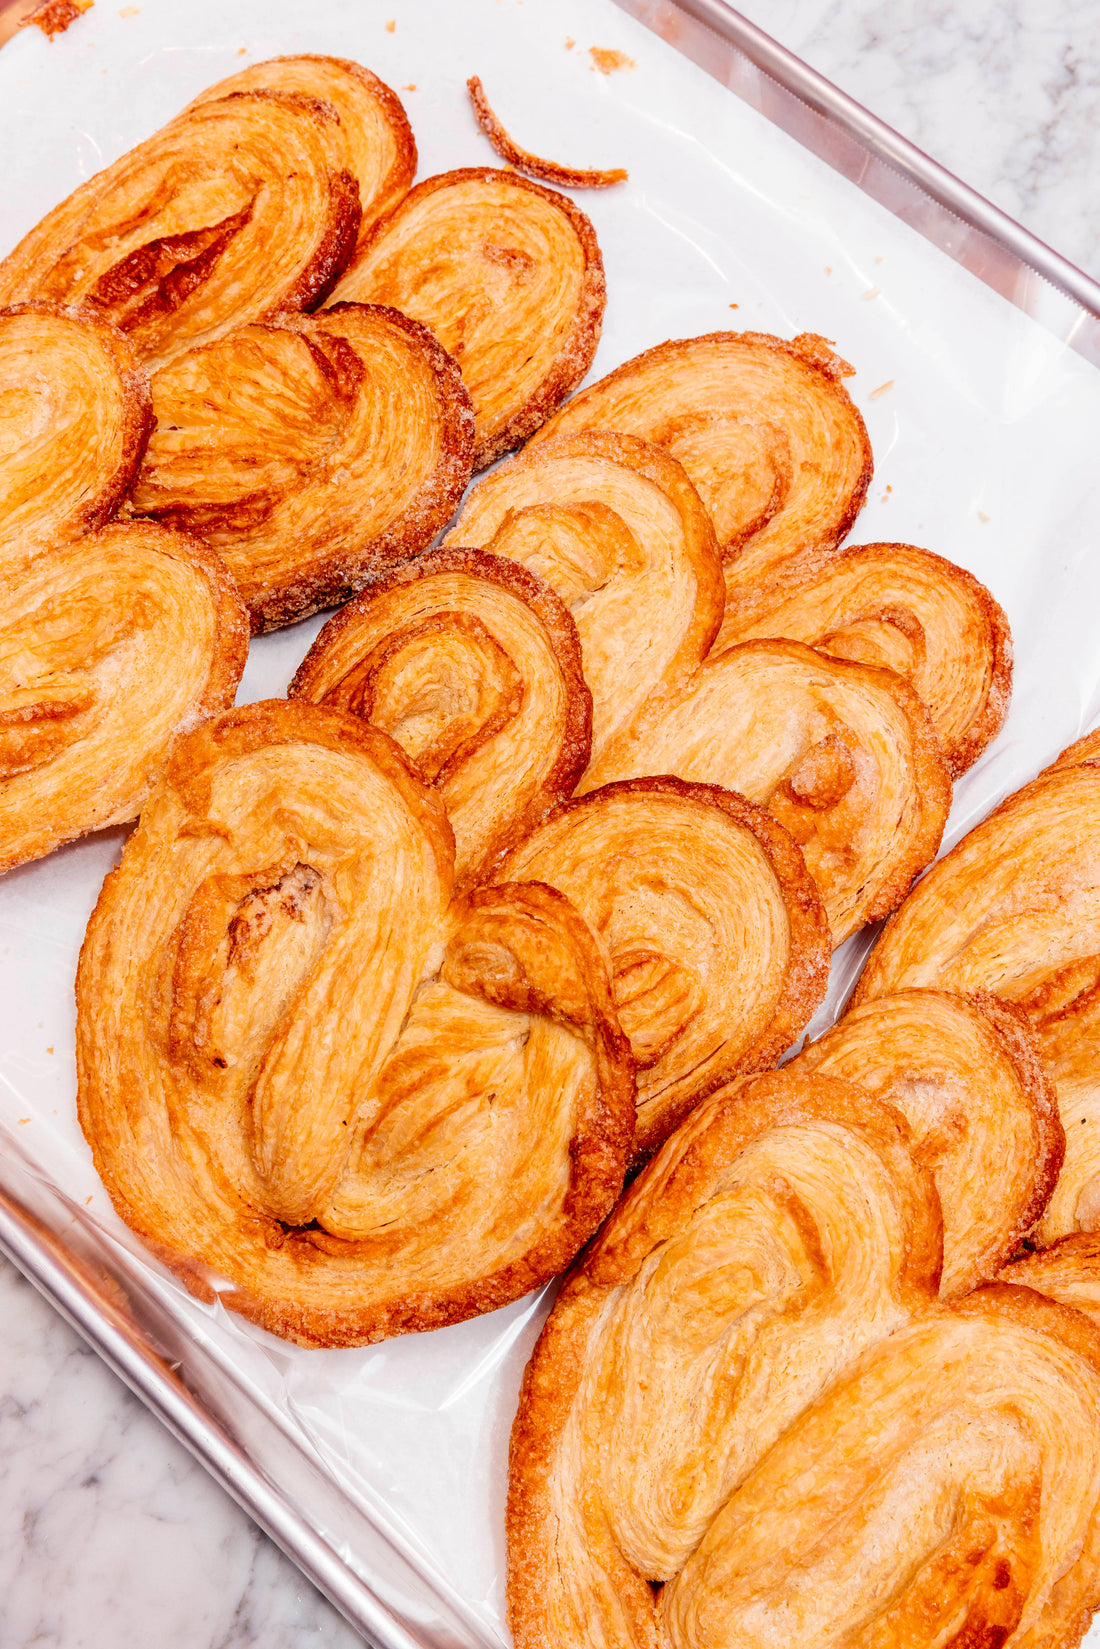 Palmiers or elephant ear pastries on a plate.